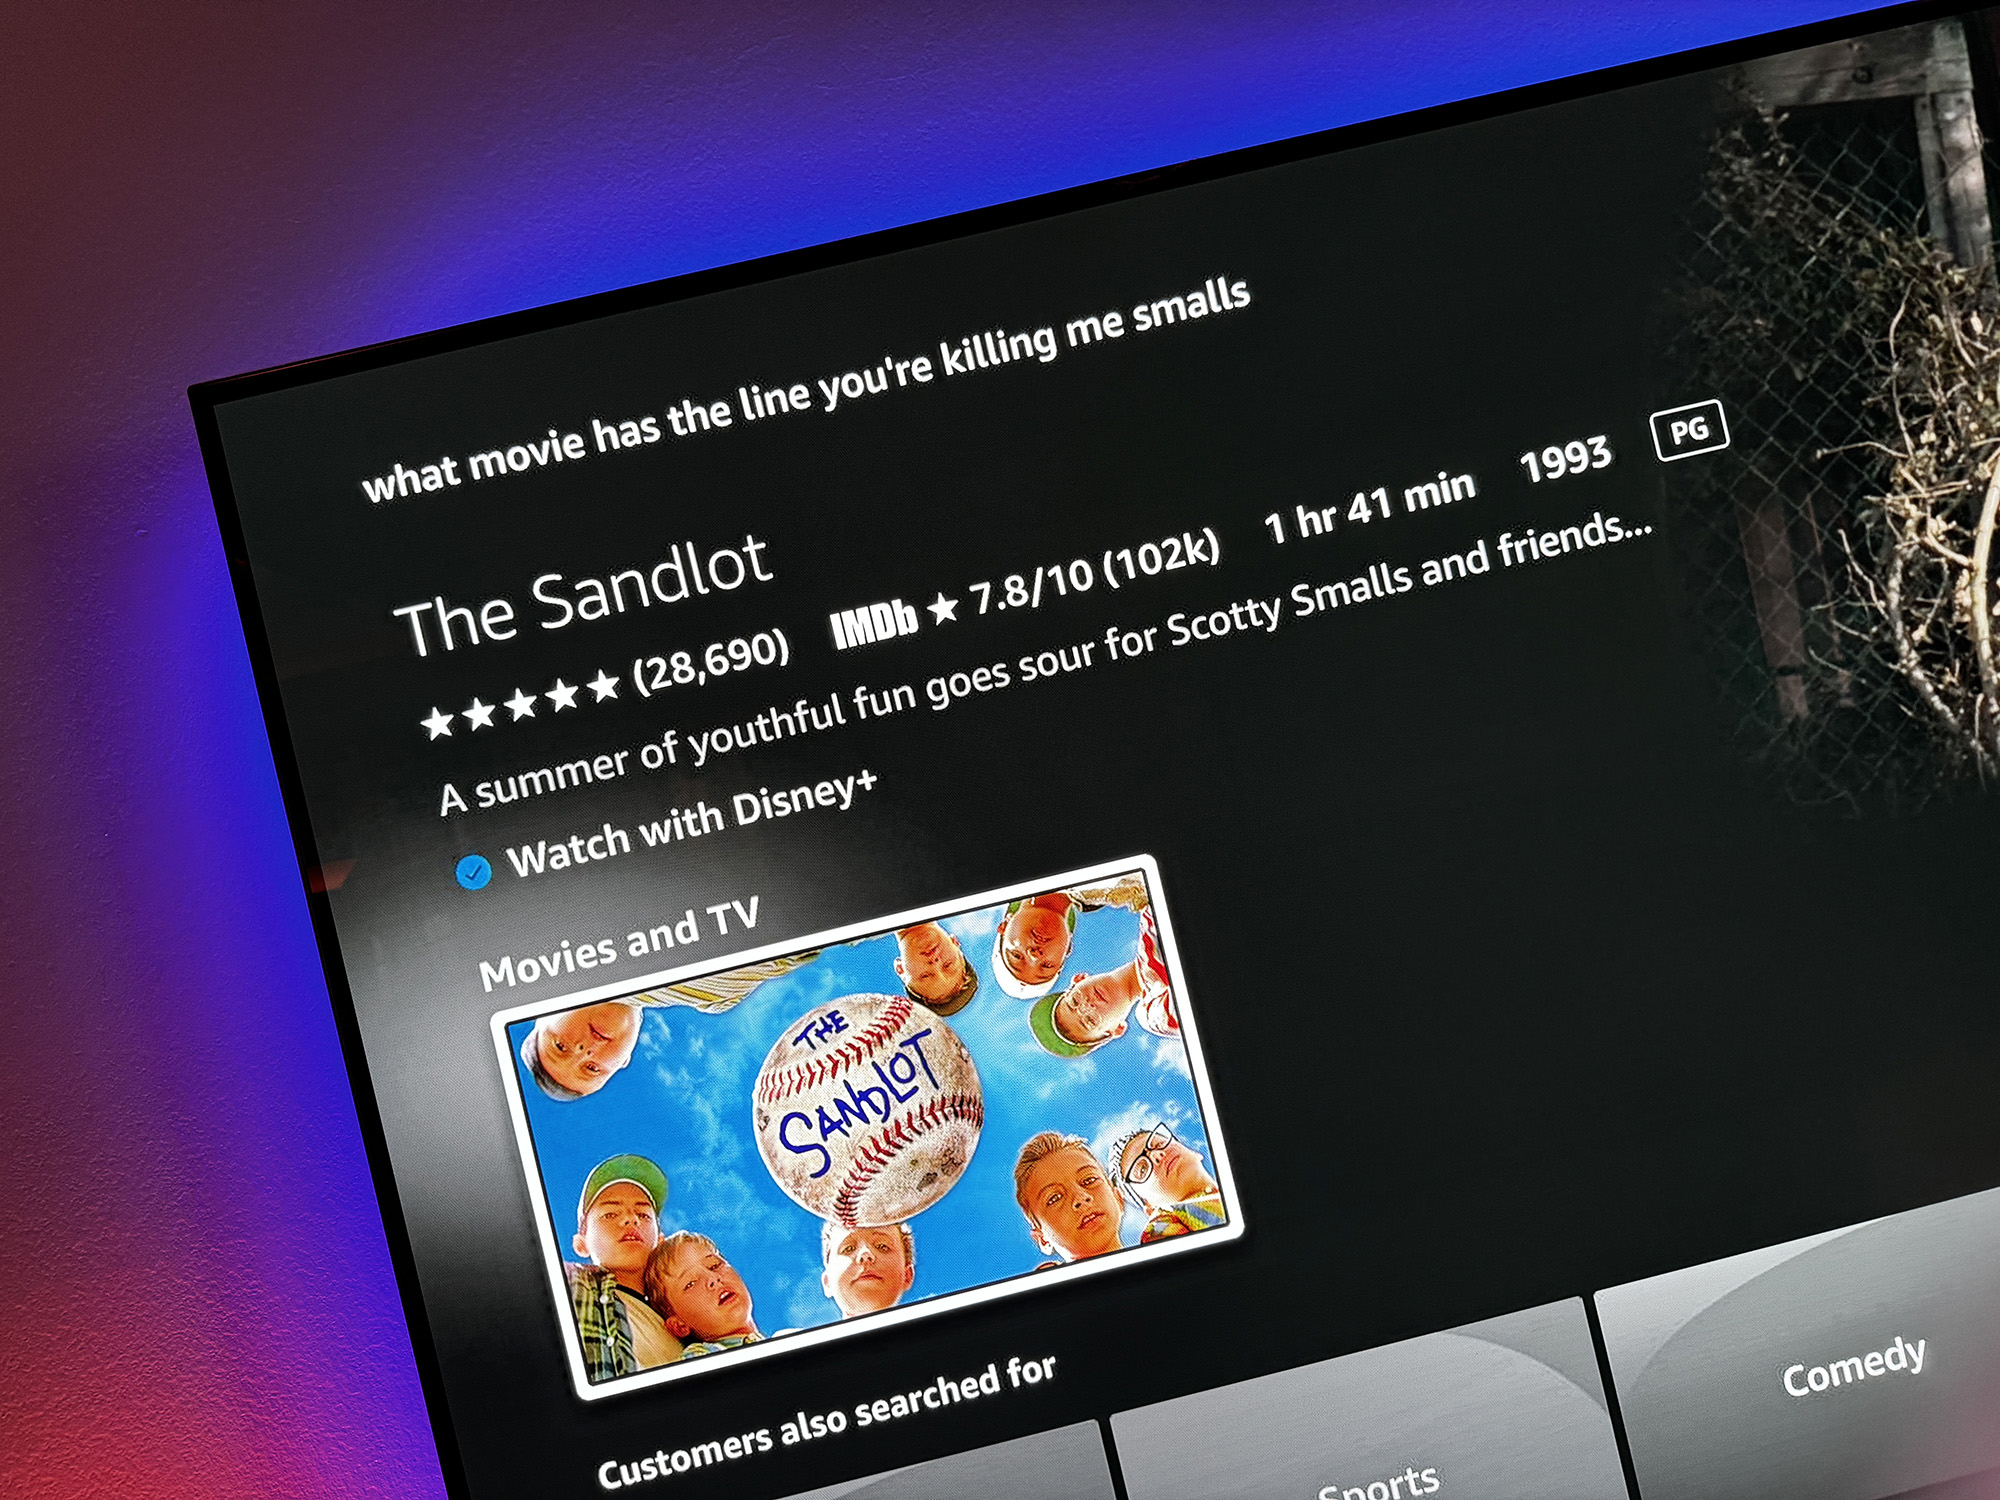 Search results for The Sandlot on Amazon Fire TV.